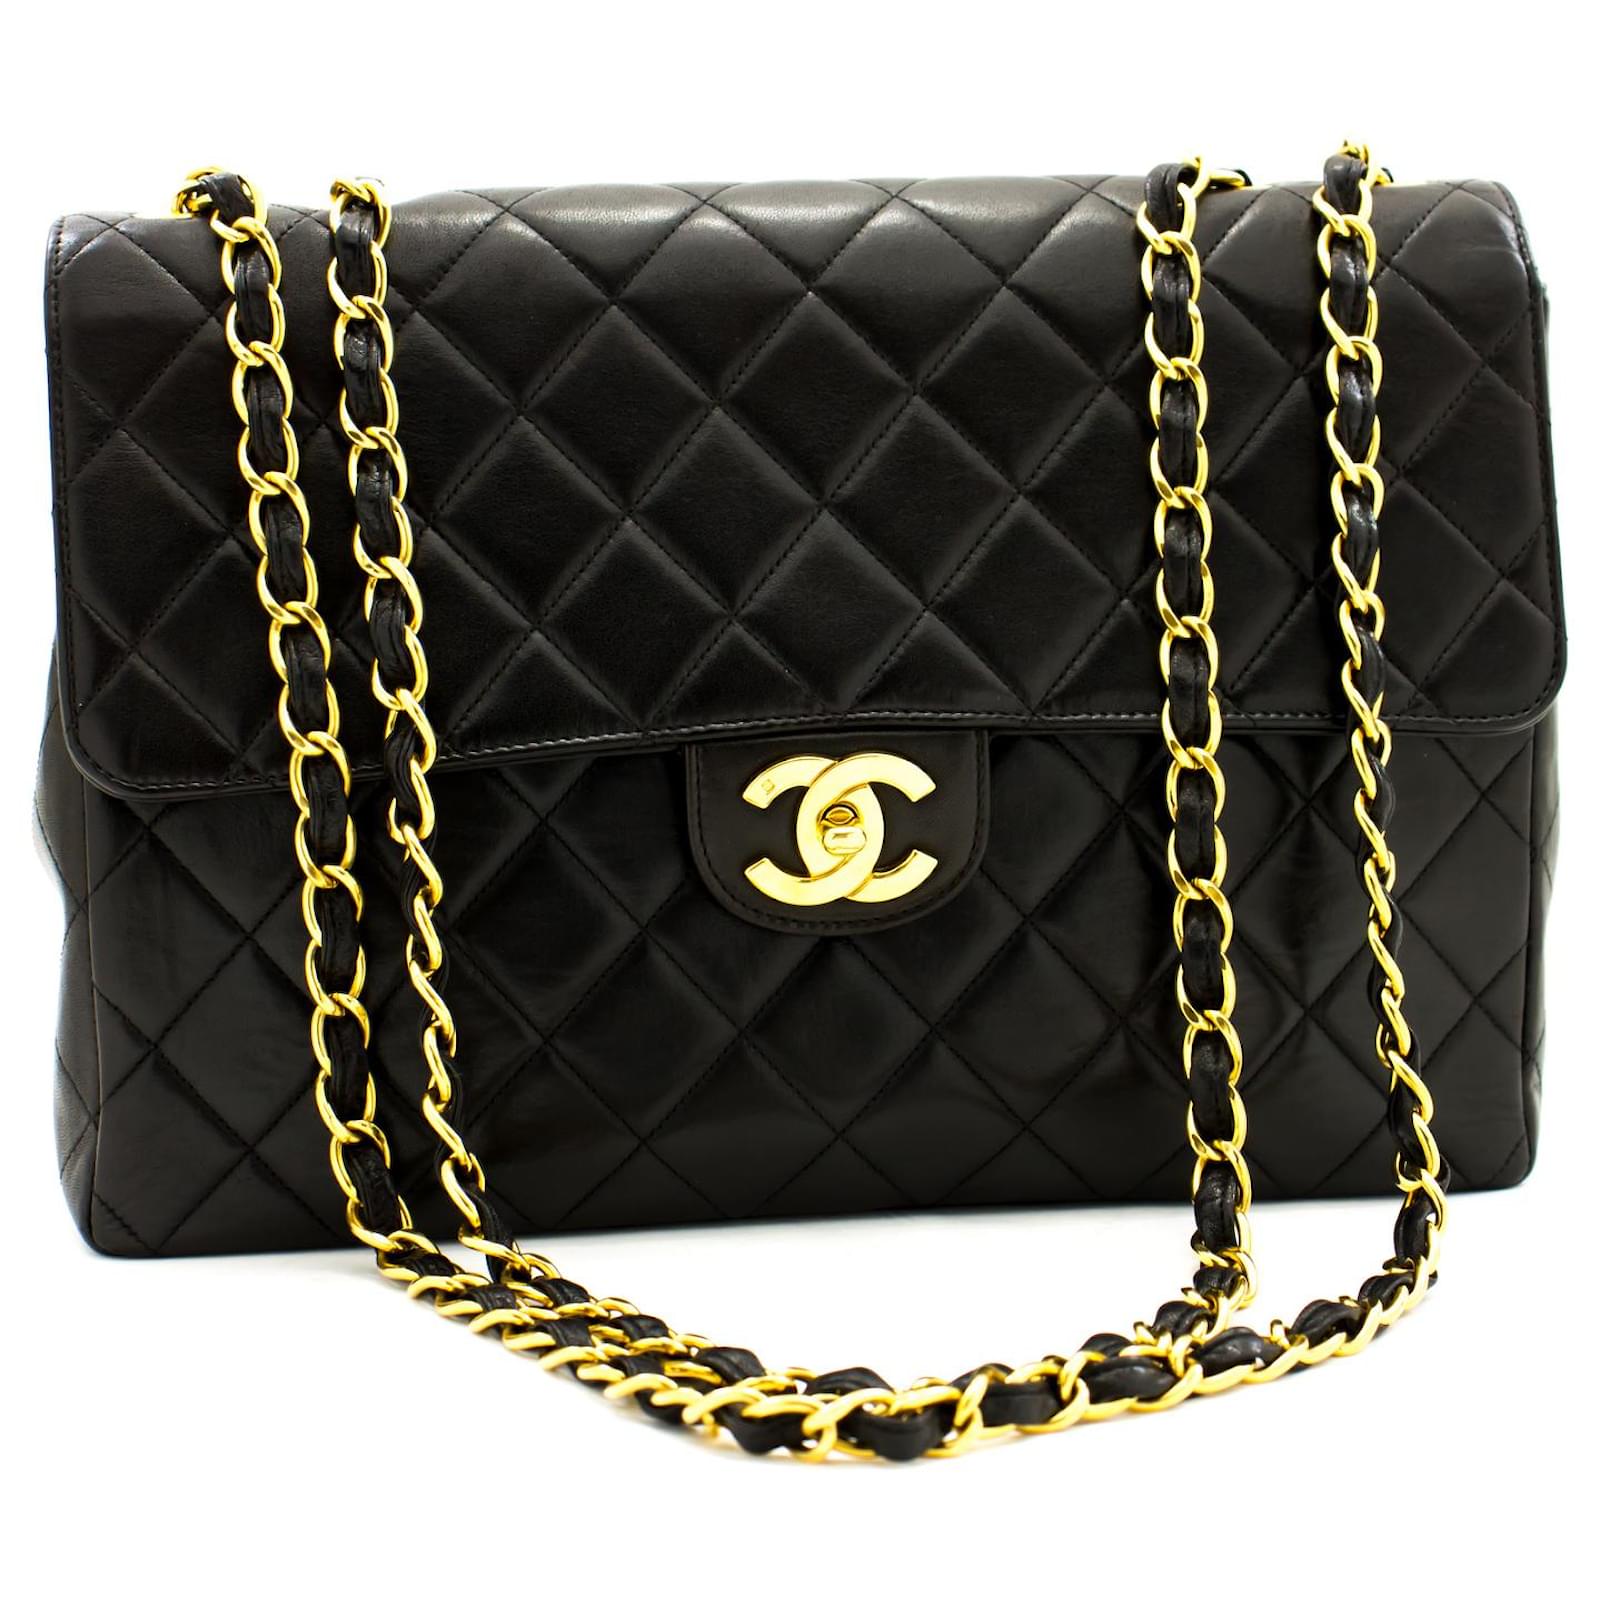 patent leather chanel bag